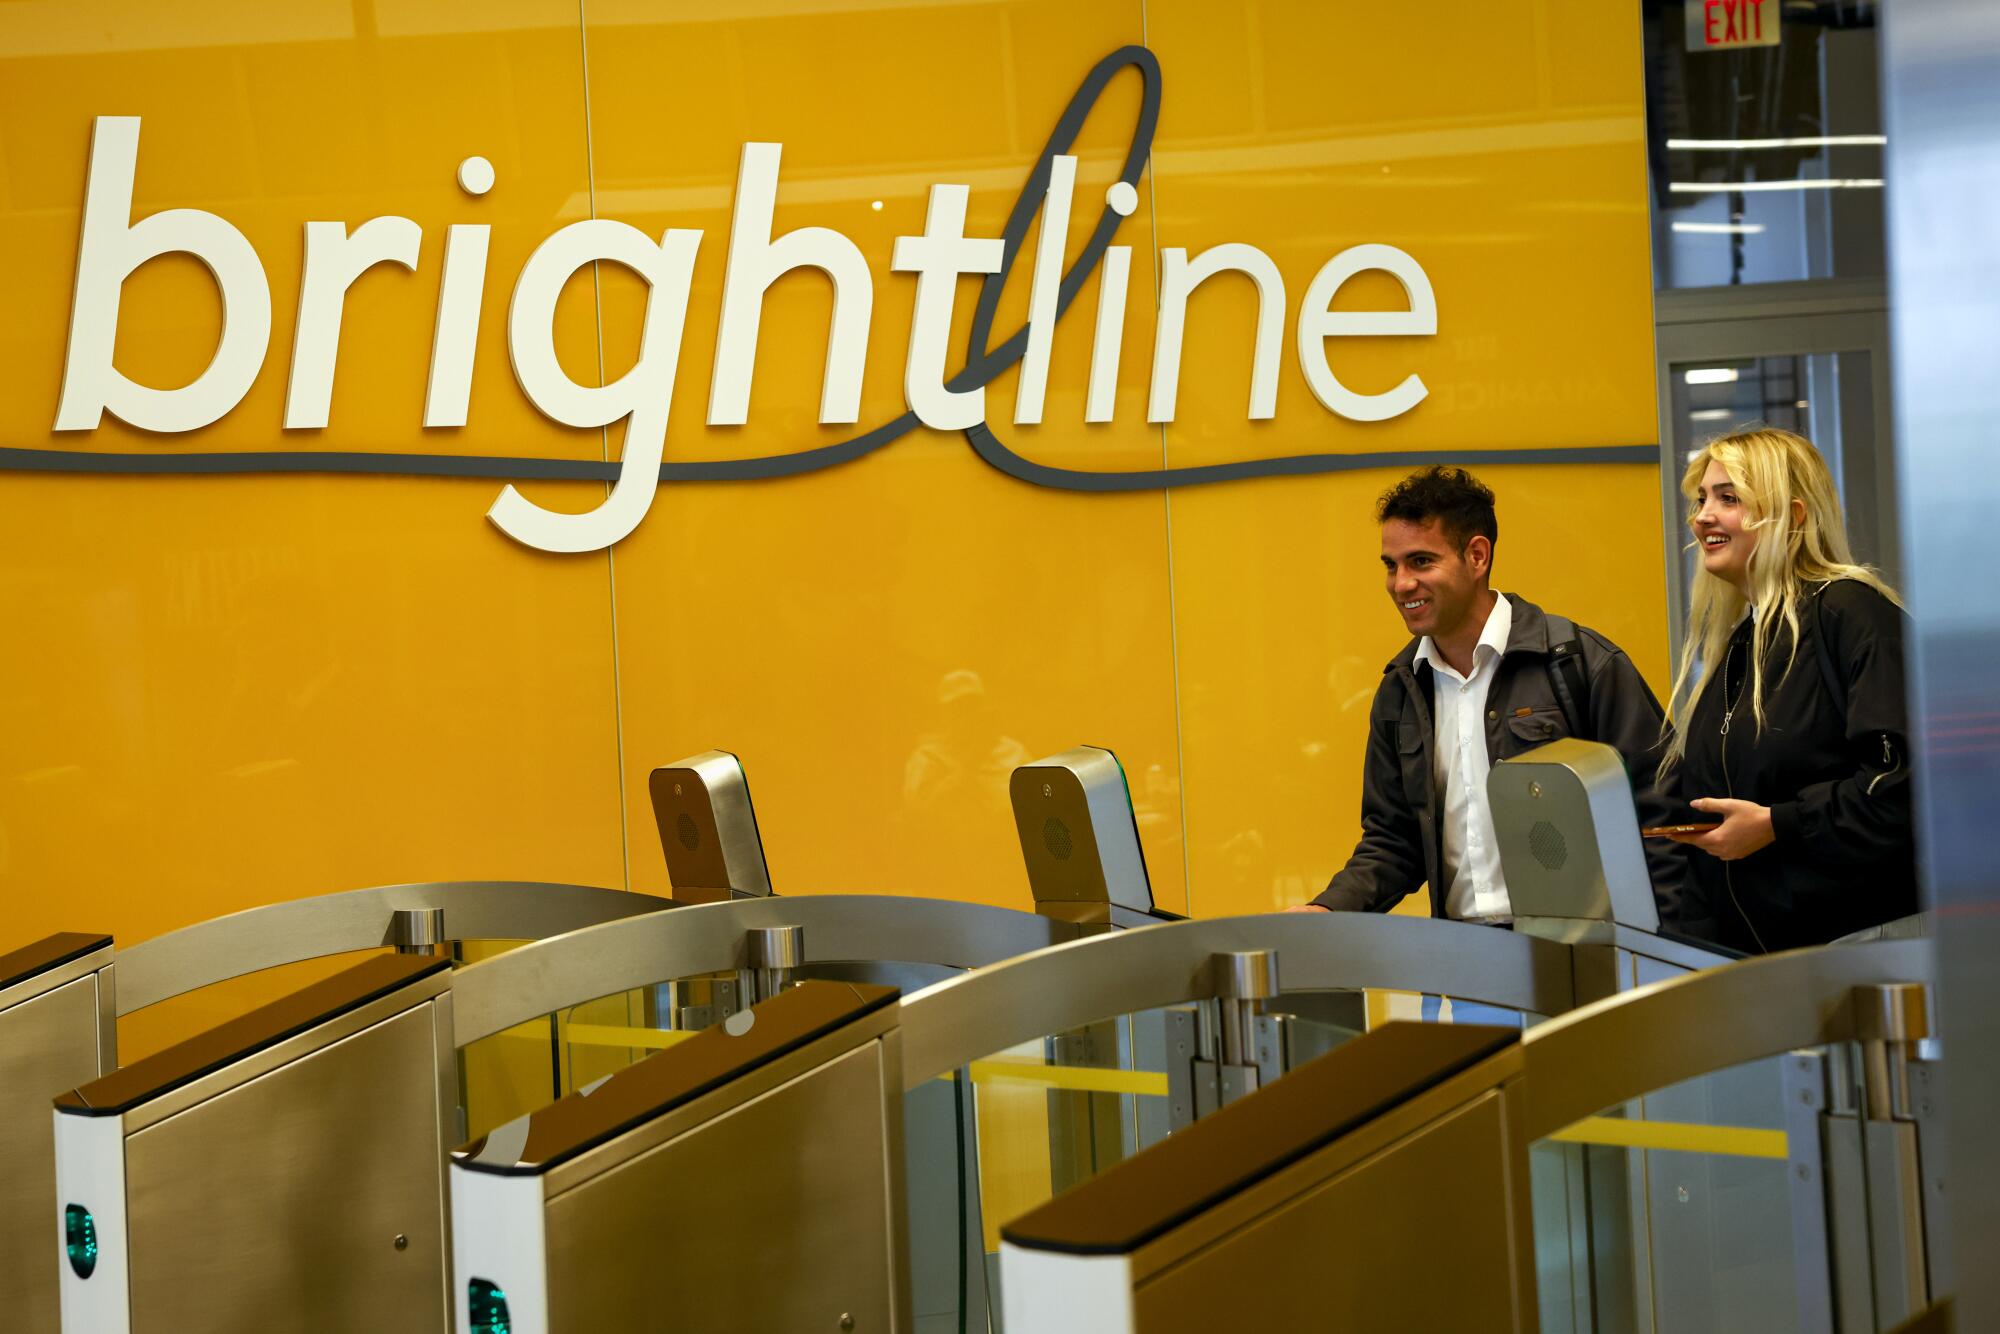 A man and a woman approach electronic gates, with a sign saying "brightline" on a yellow wall 